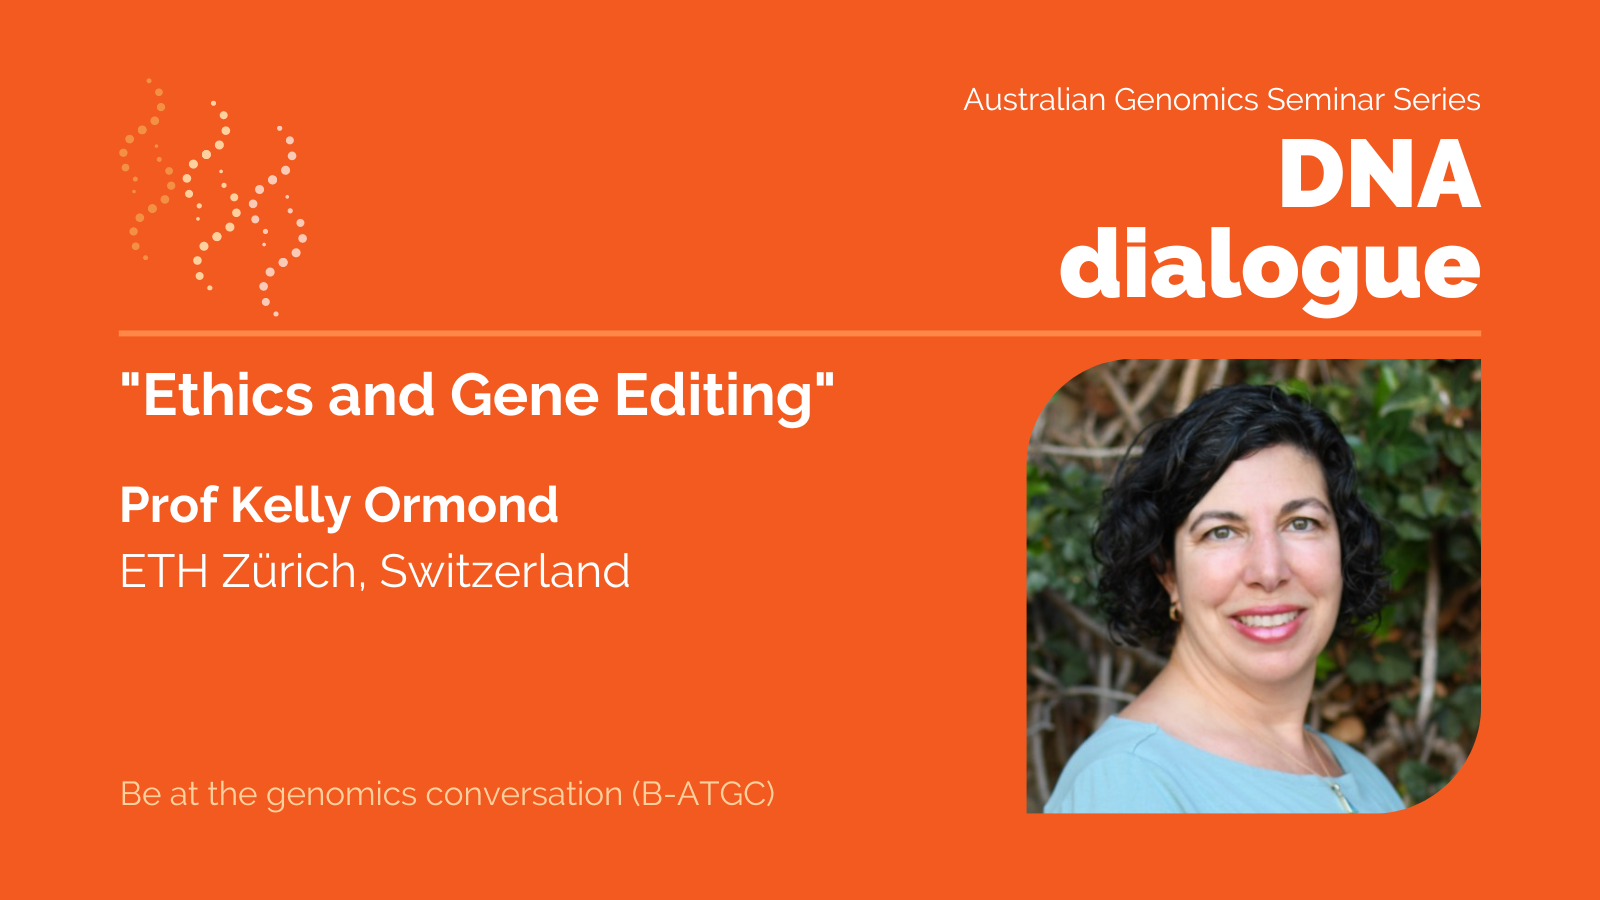 DNA dialogue seminar - "Ethics and Gene Editing" with Prof Kelly Ormond from ETH Zürich in Switzerland